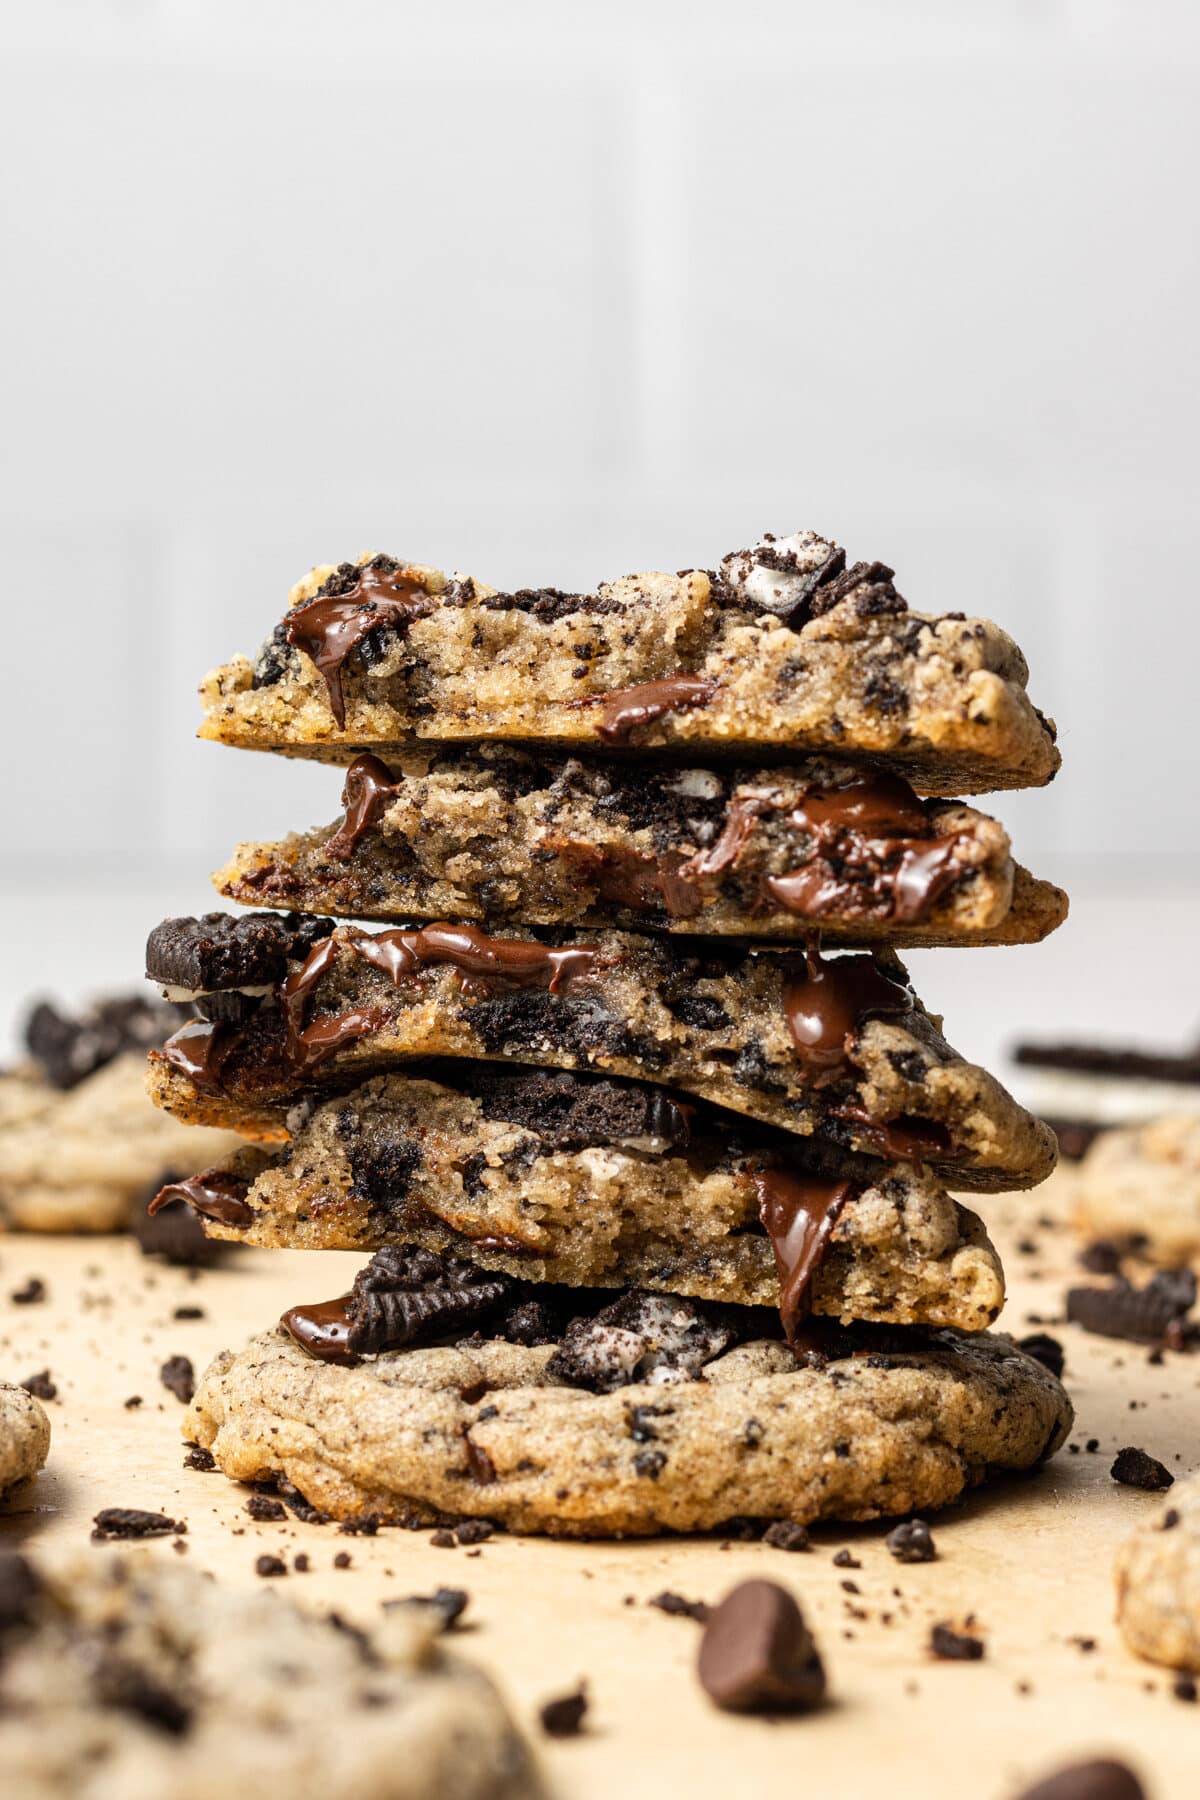 Oreo chocolate chip cookies stacked and broken in half with chocolate chips scattered around